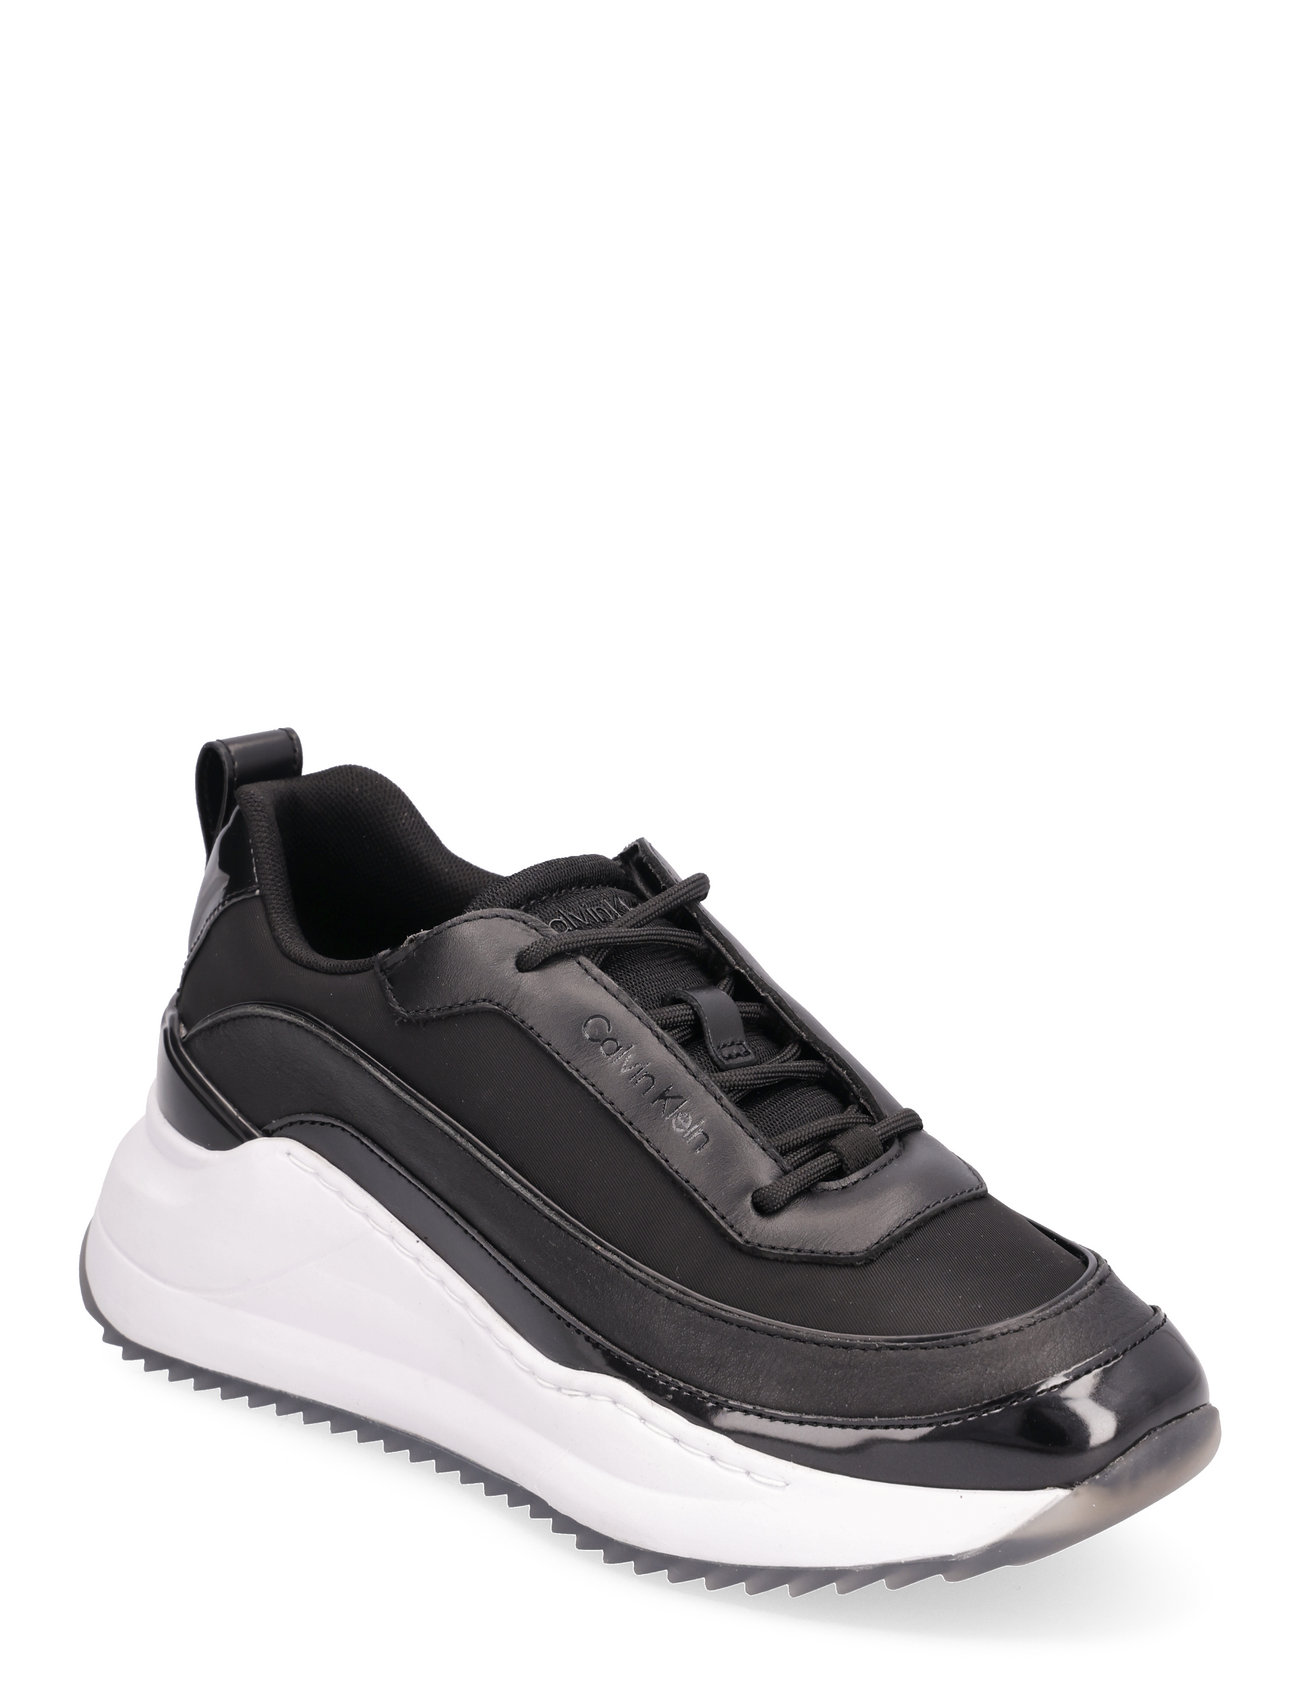 Supersonic hastighed følgeslutning Mangler Calvin Klein Chunky Internal Wedge Lace Up - Low top sneakers - Boozt.com